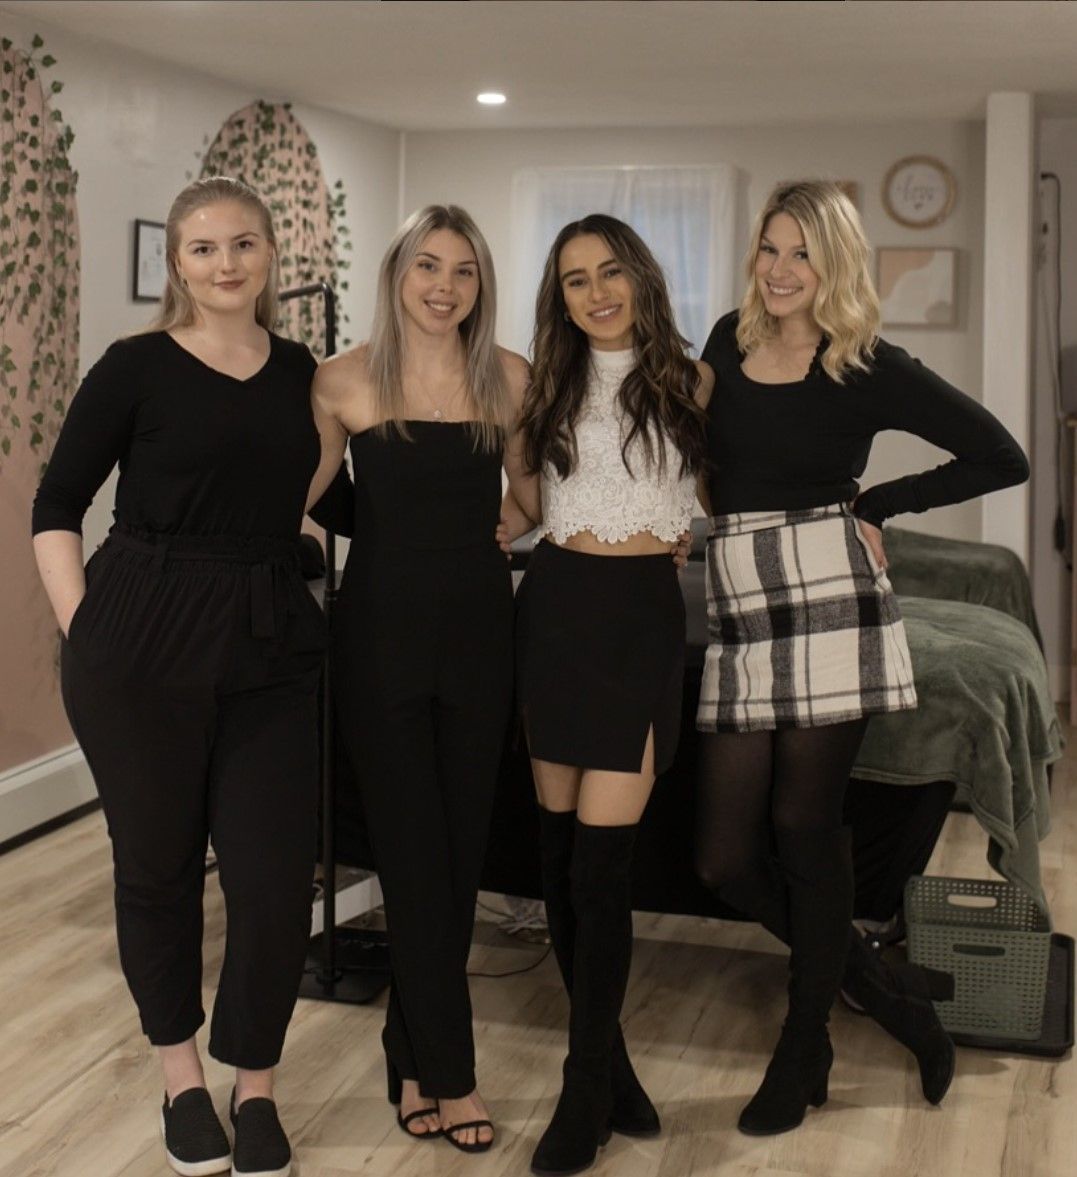 Four women are posing for a picture in a living room